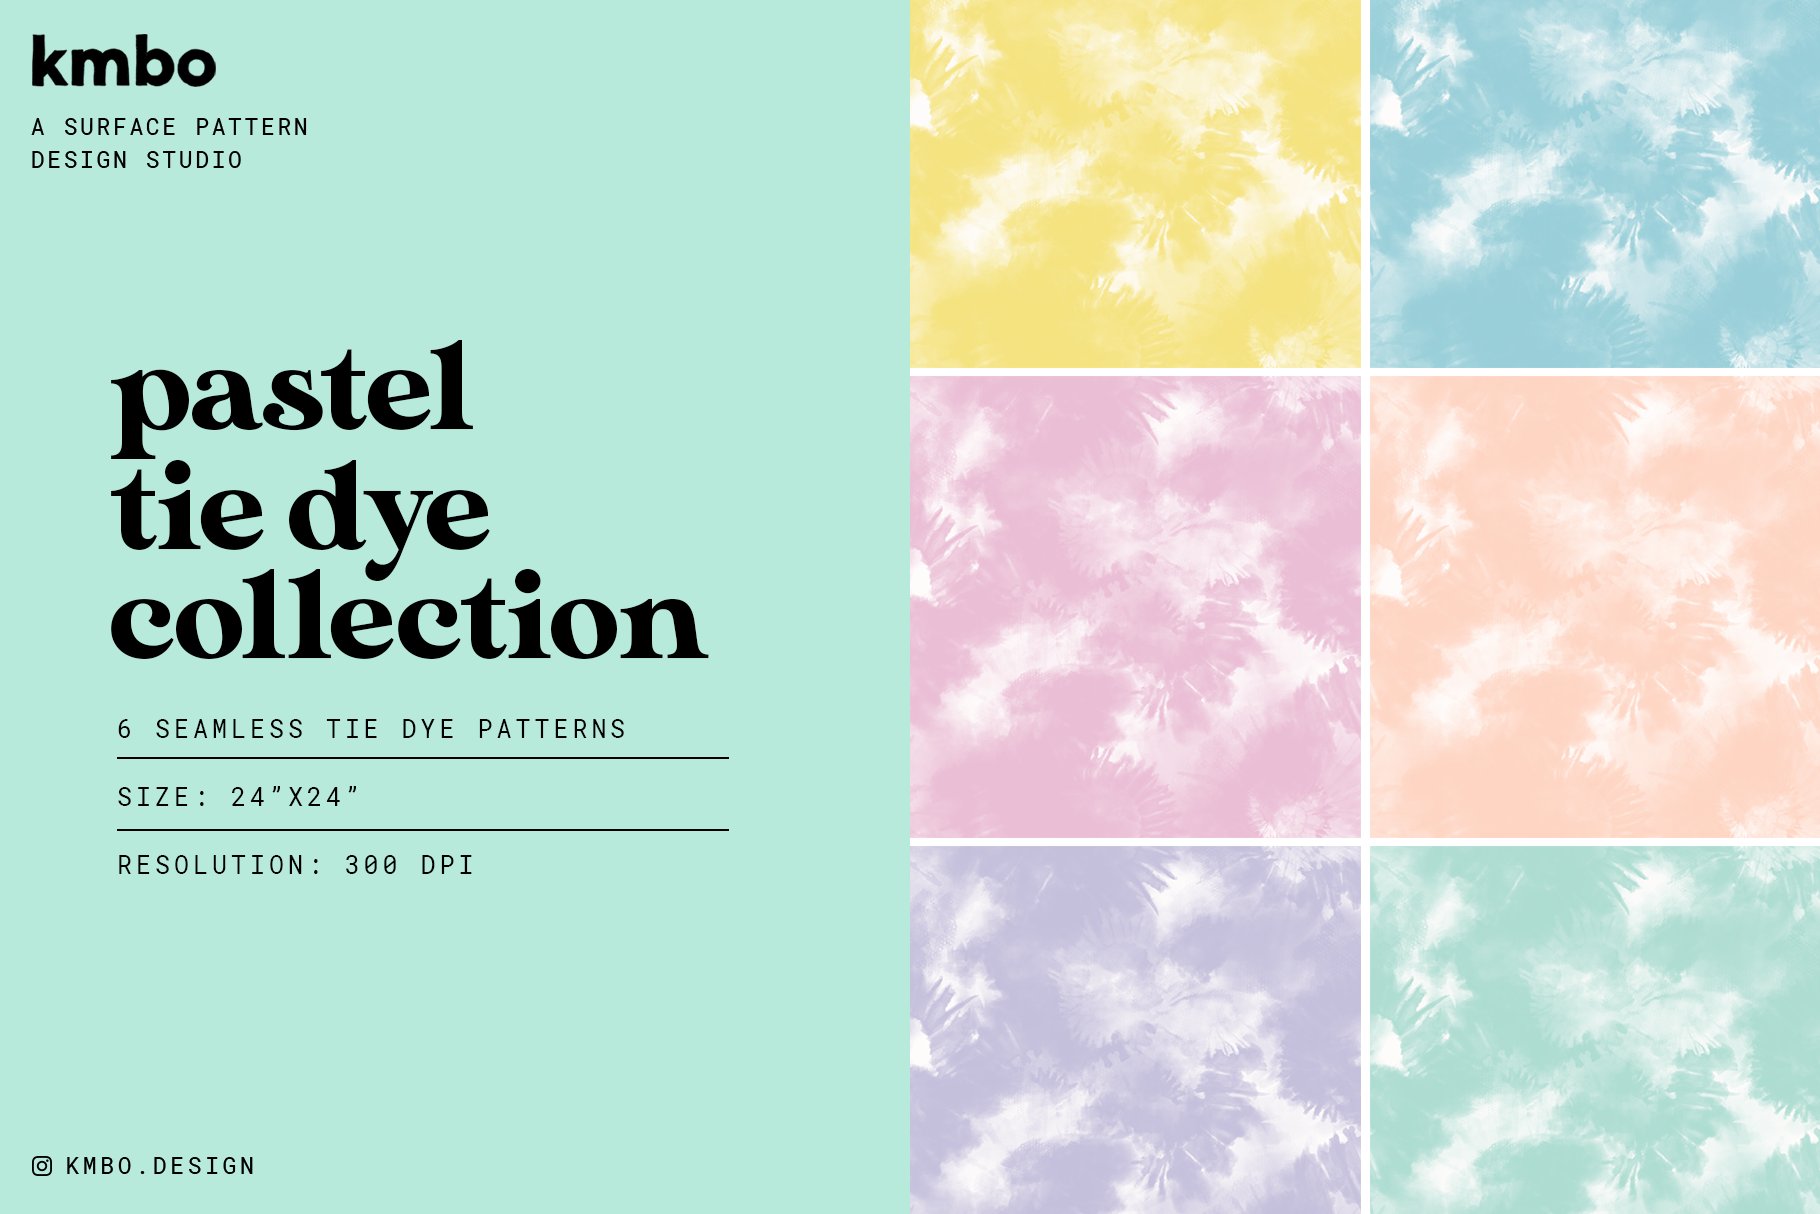 Pastel Tie Dye Pattern Collection cover image.